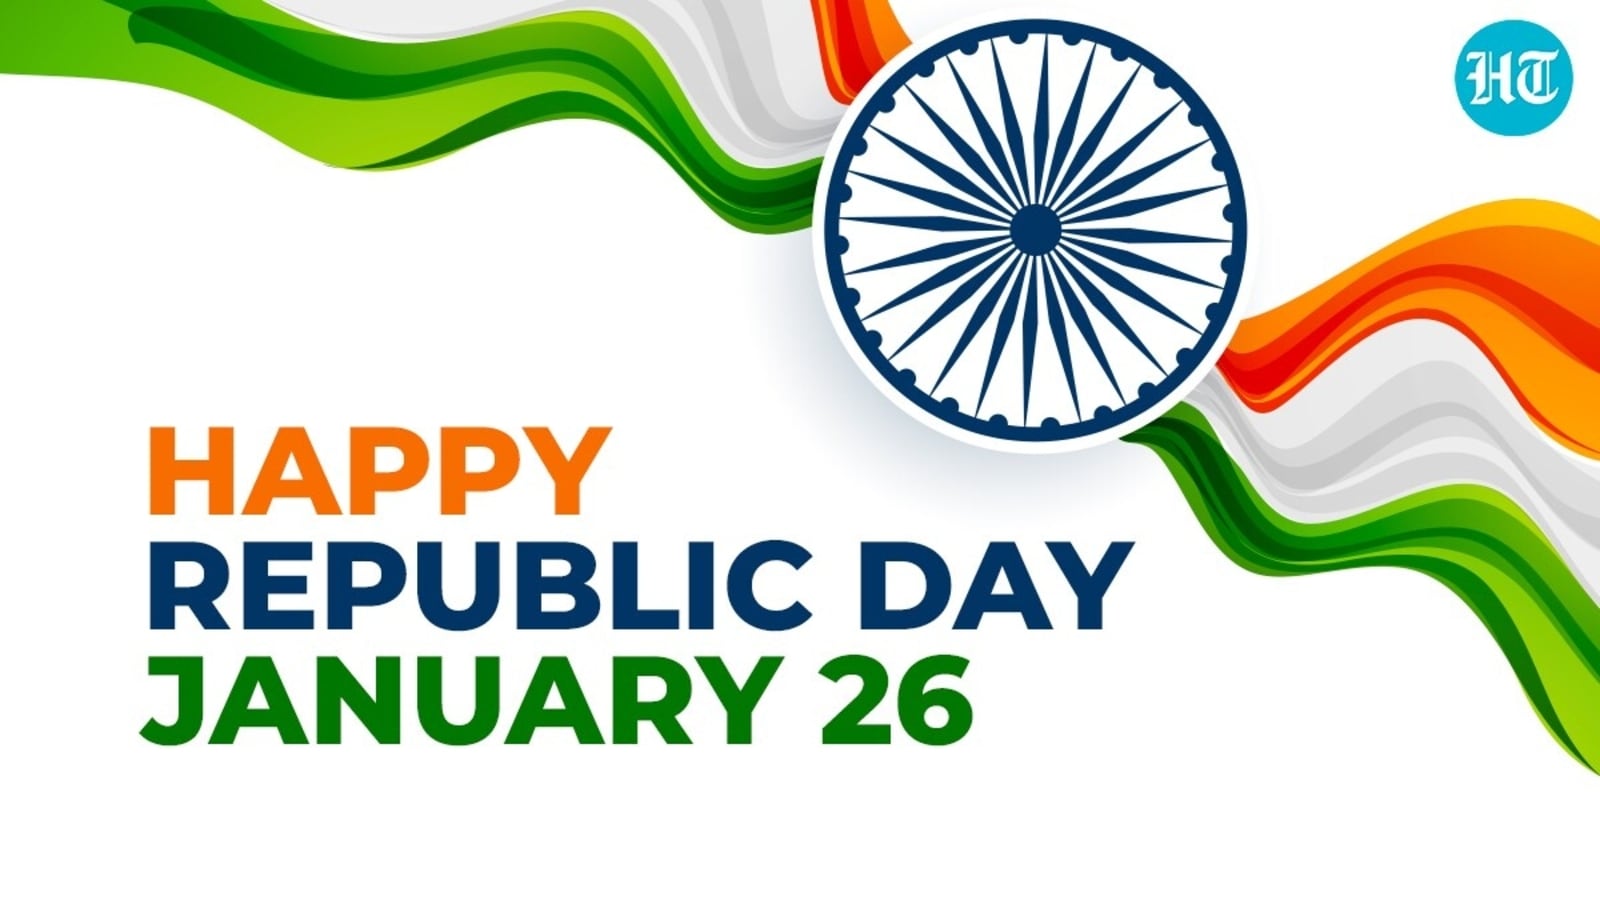 republic day images